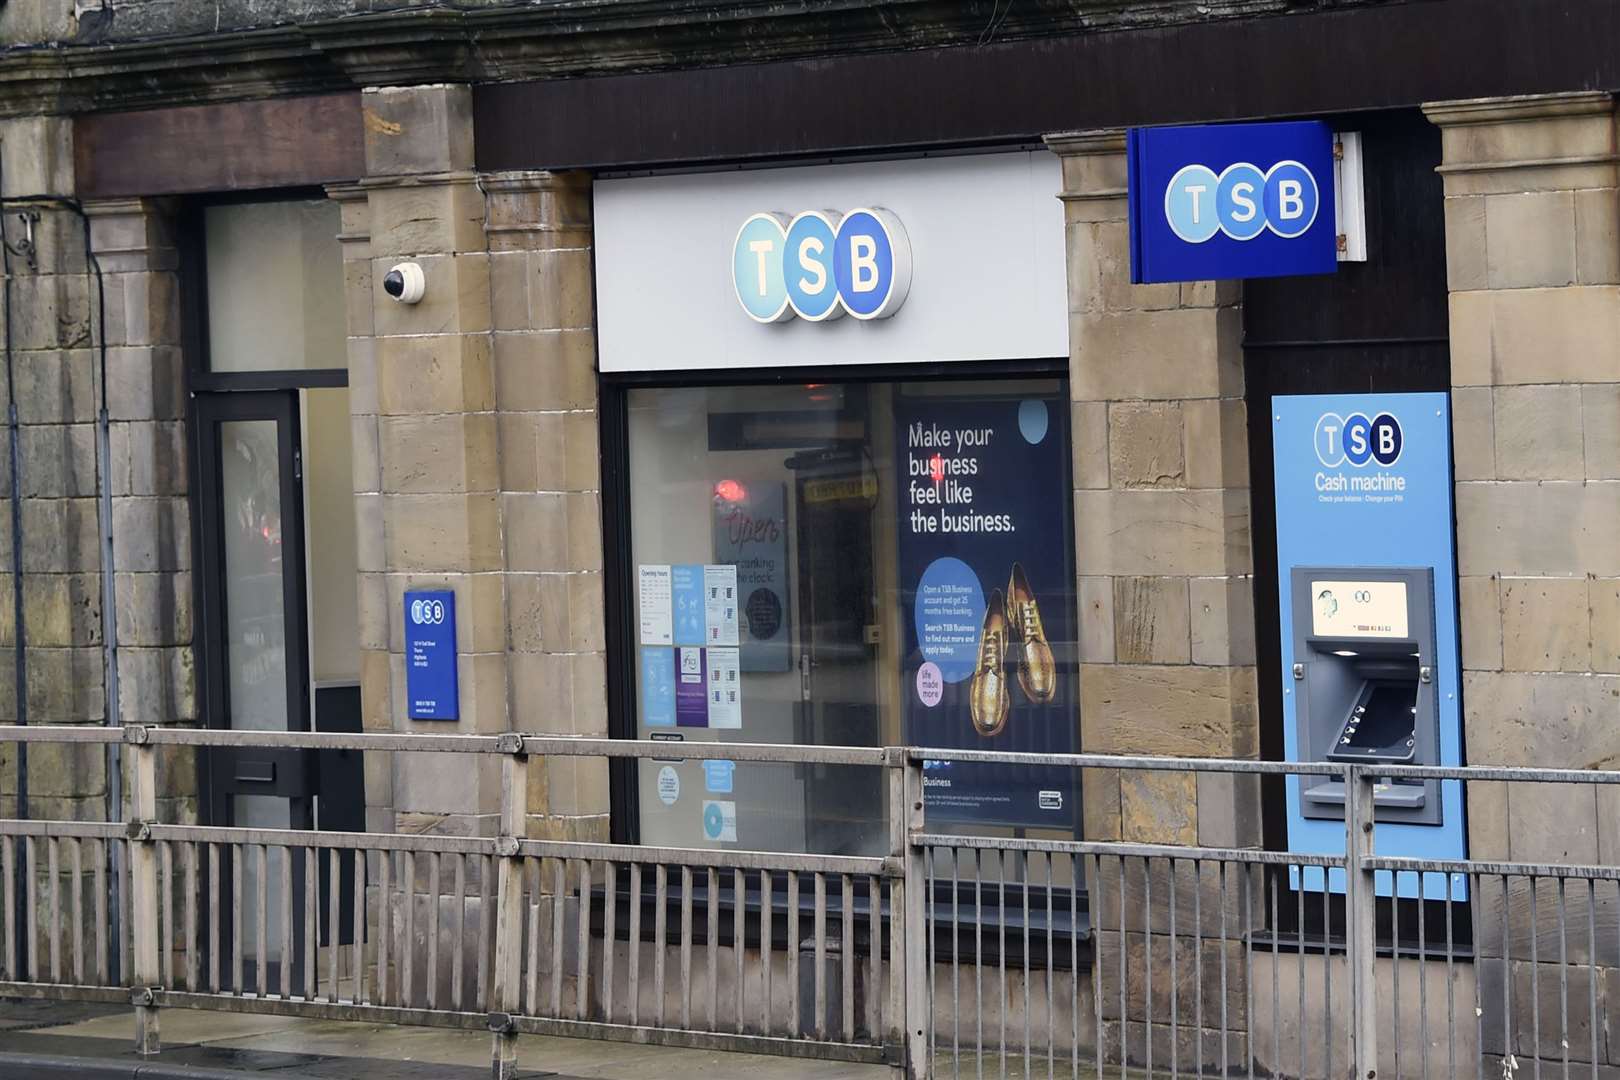 The TSB branch in Thurso 'means so much to so many elderly and vulnerable people', a local woman told Councillor Matthew Reiss.